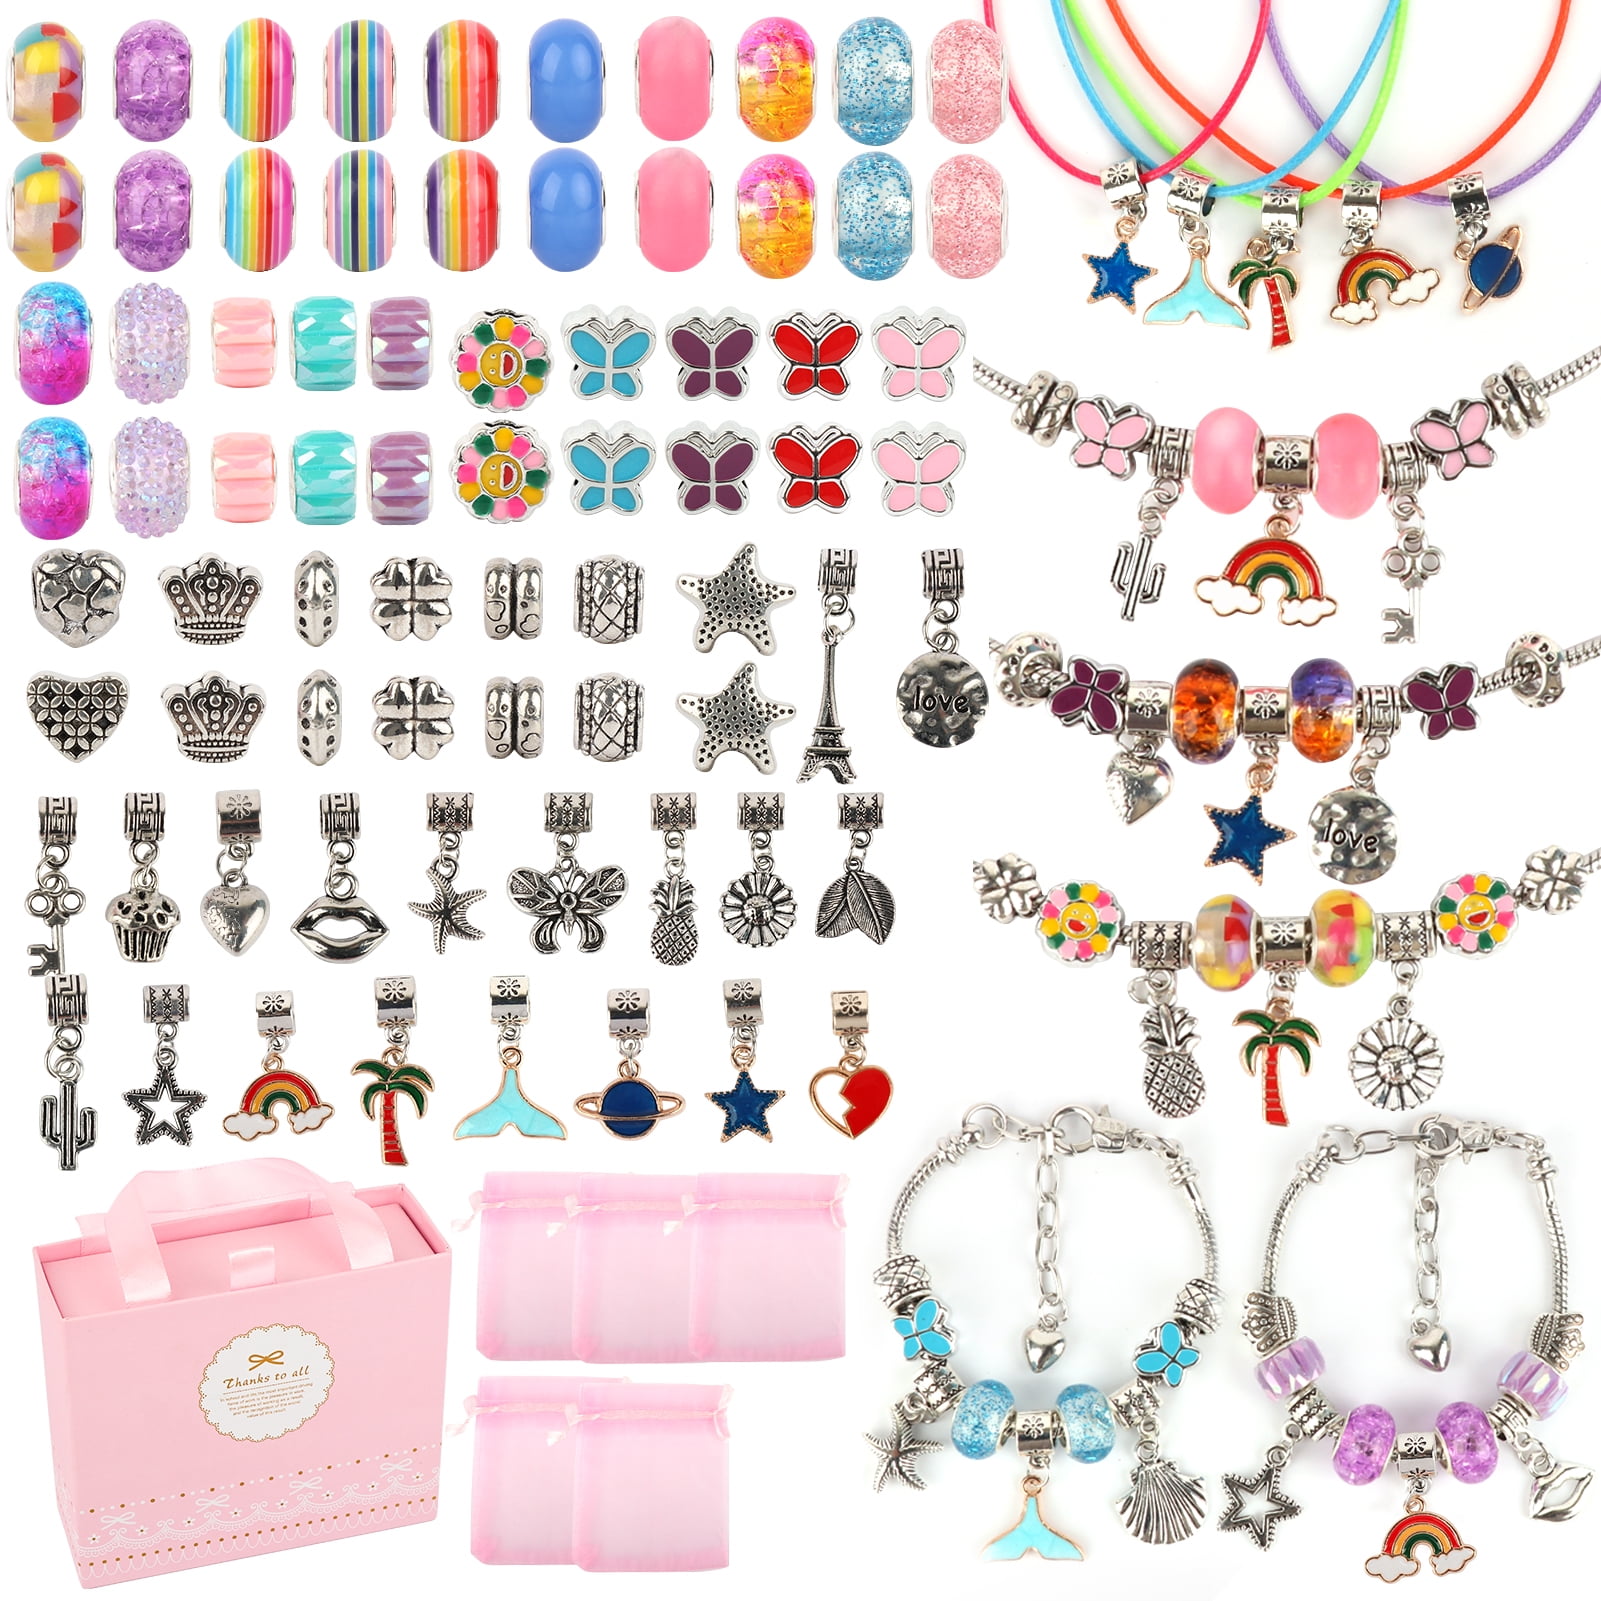 Kids Jewelry Making Kits in Arts & Crafts for Kids 